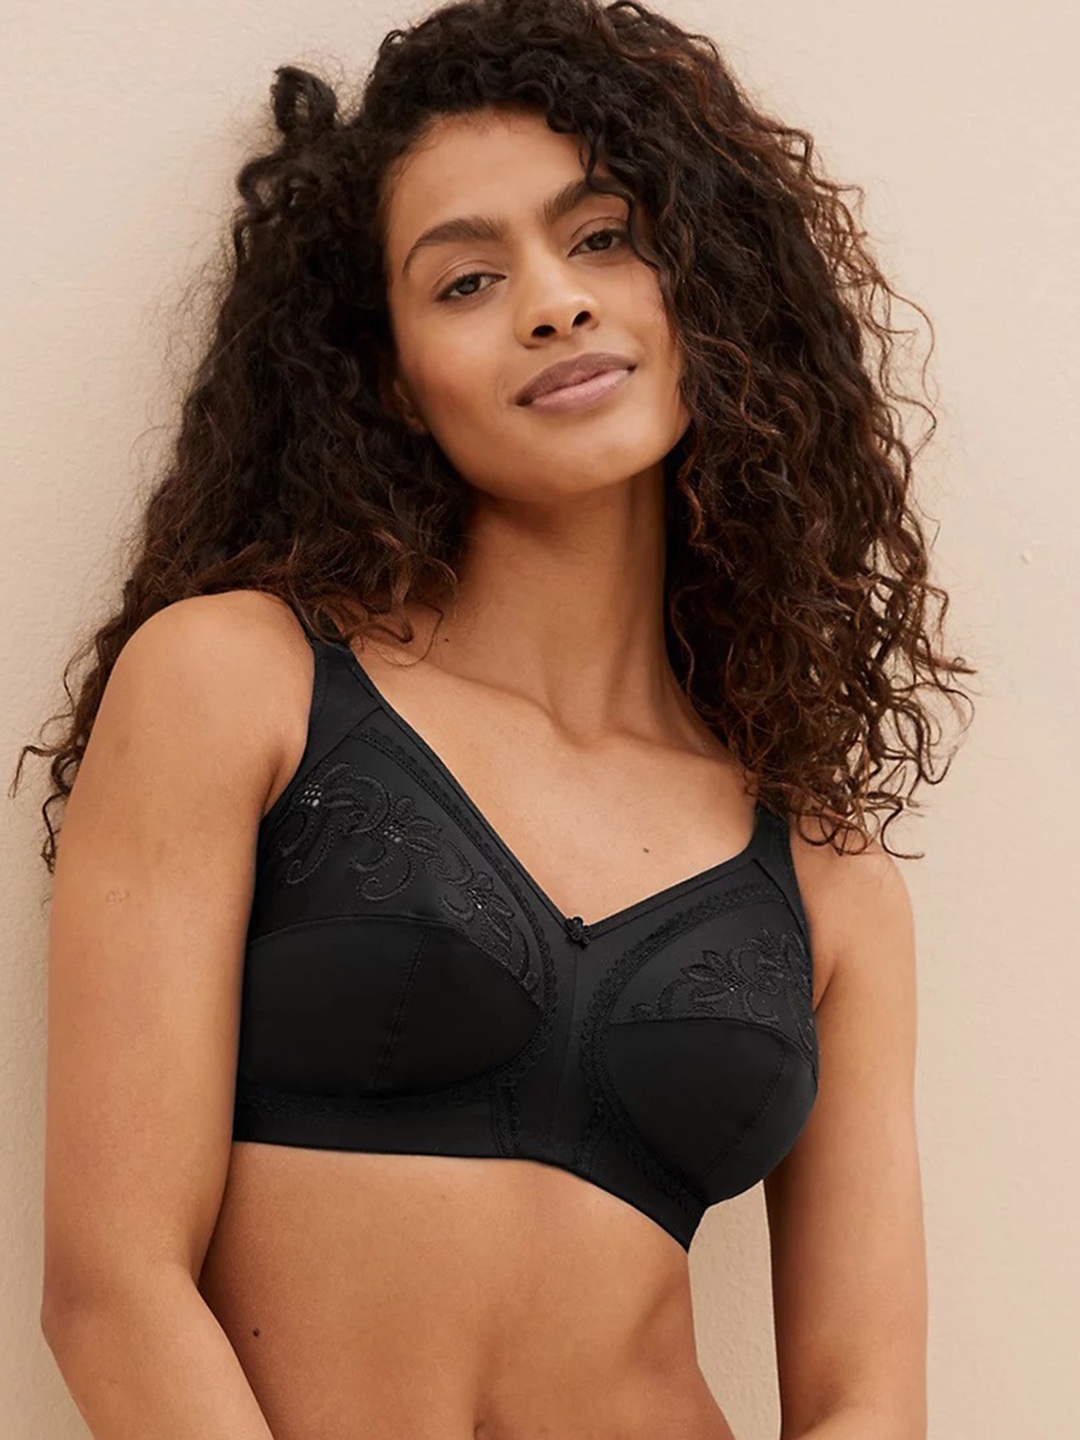 Buy Marks & Spencer Lightly Lined Wired Full Coverage Lace Bra